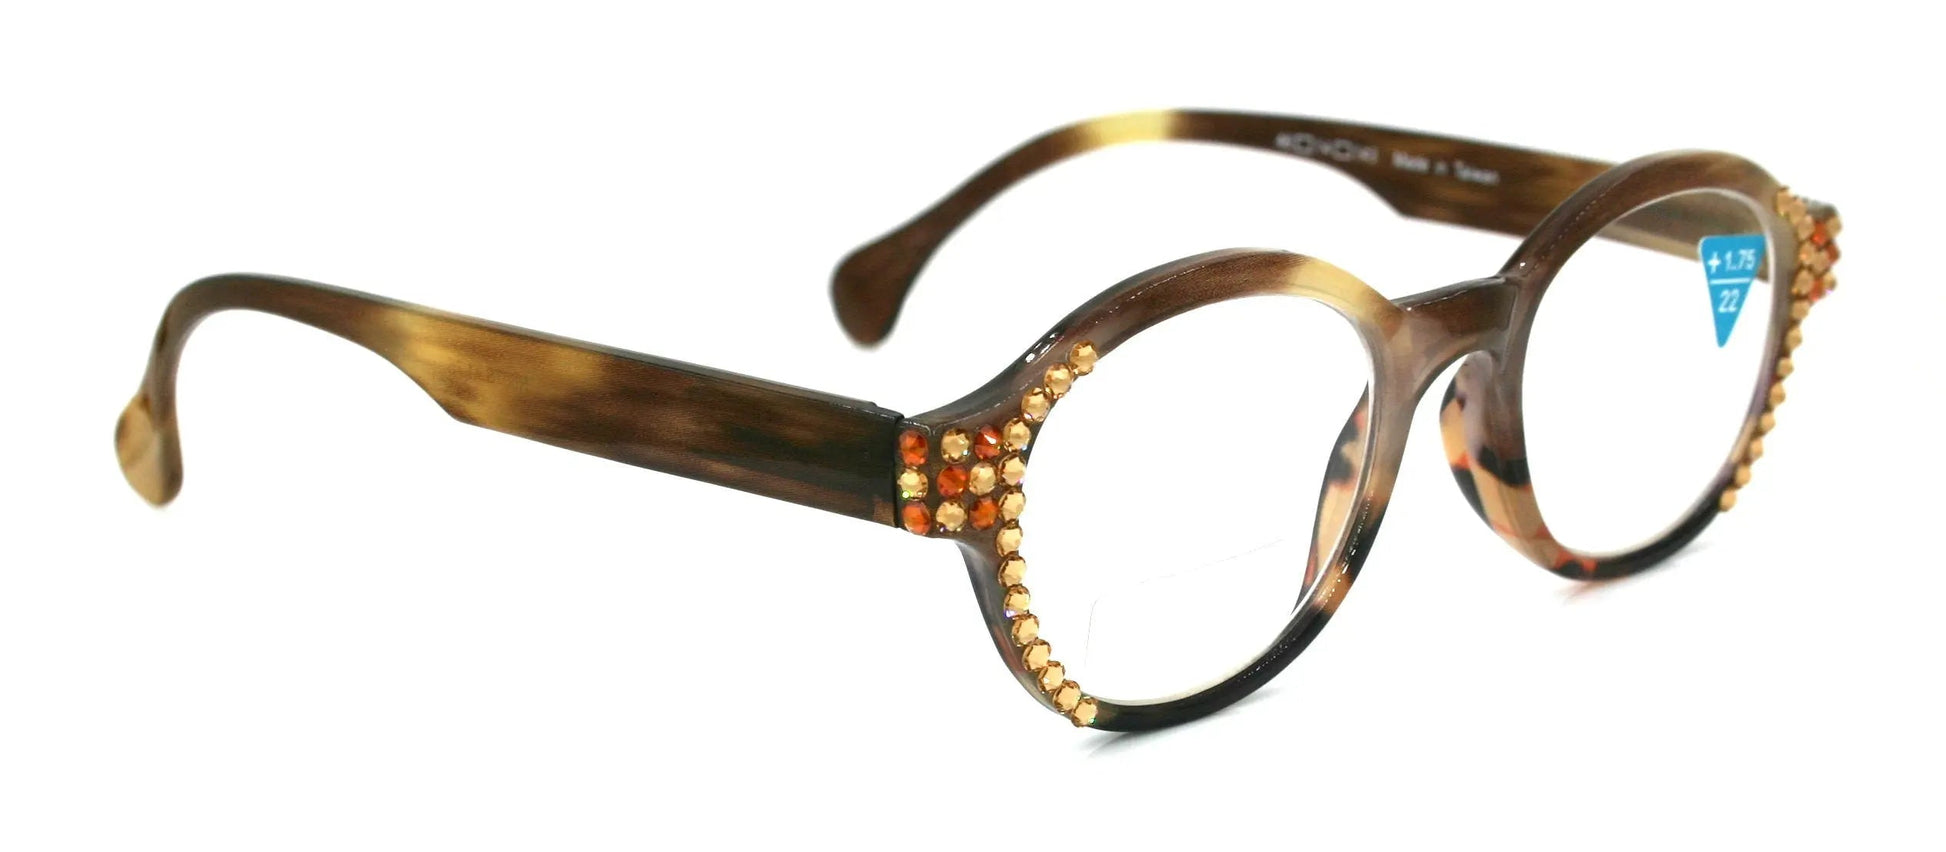 The Alchemist, (Bling) Round Women Reading Glasses W (L. Colorado, Cooper) Genuine European Crystals  (Marble Brown) Circle NY Fifth Avenue 